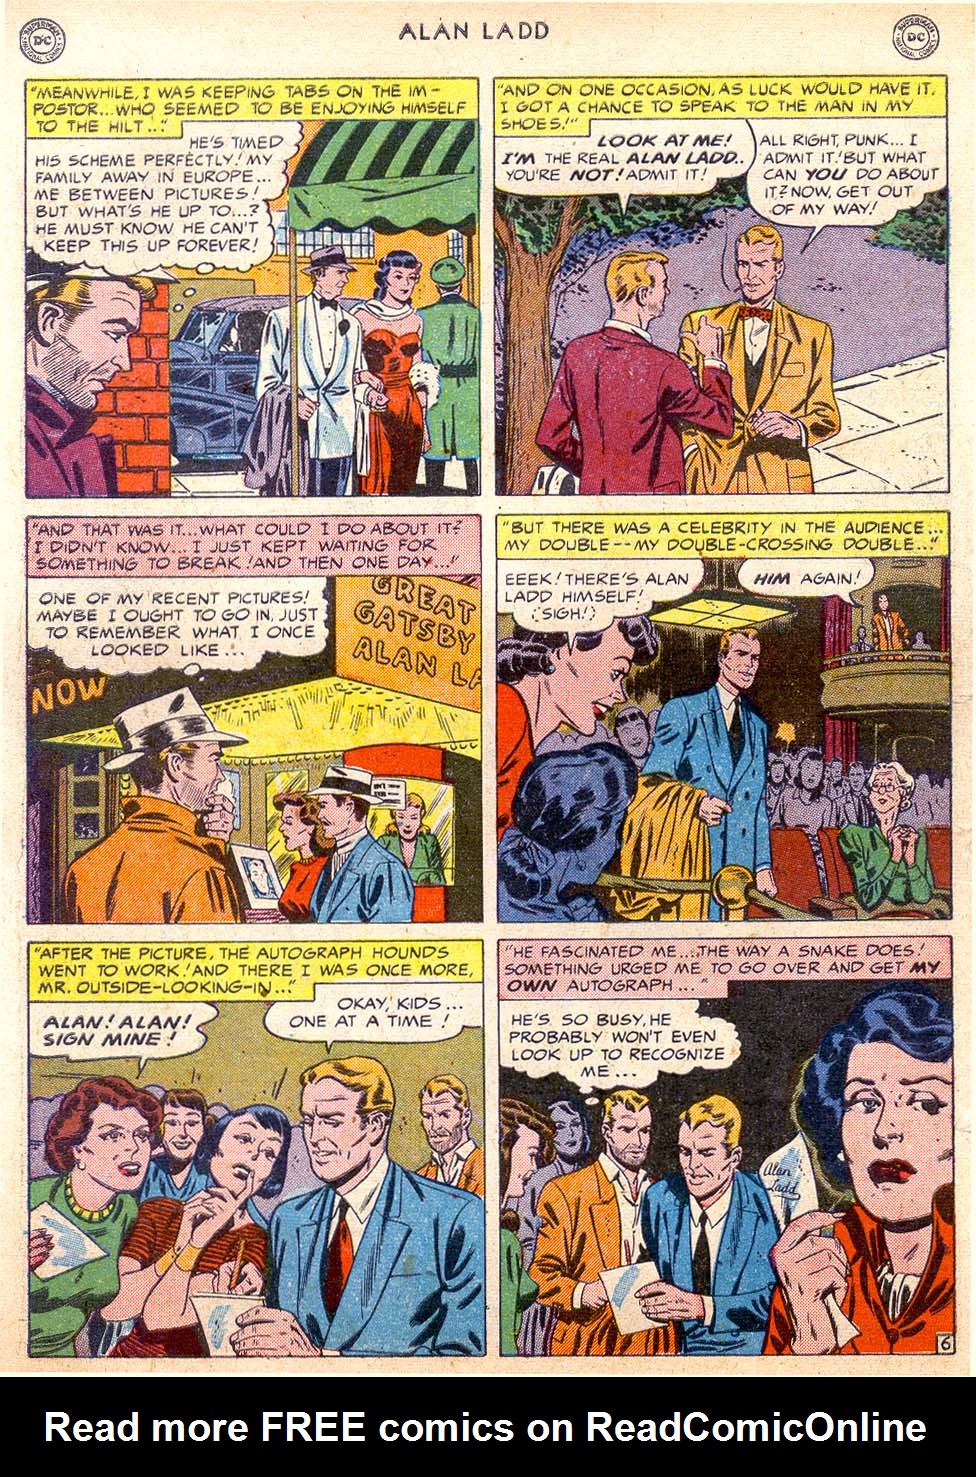 Read online Adventures of Alan Ladd comic -  Issue #4 - 8